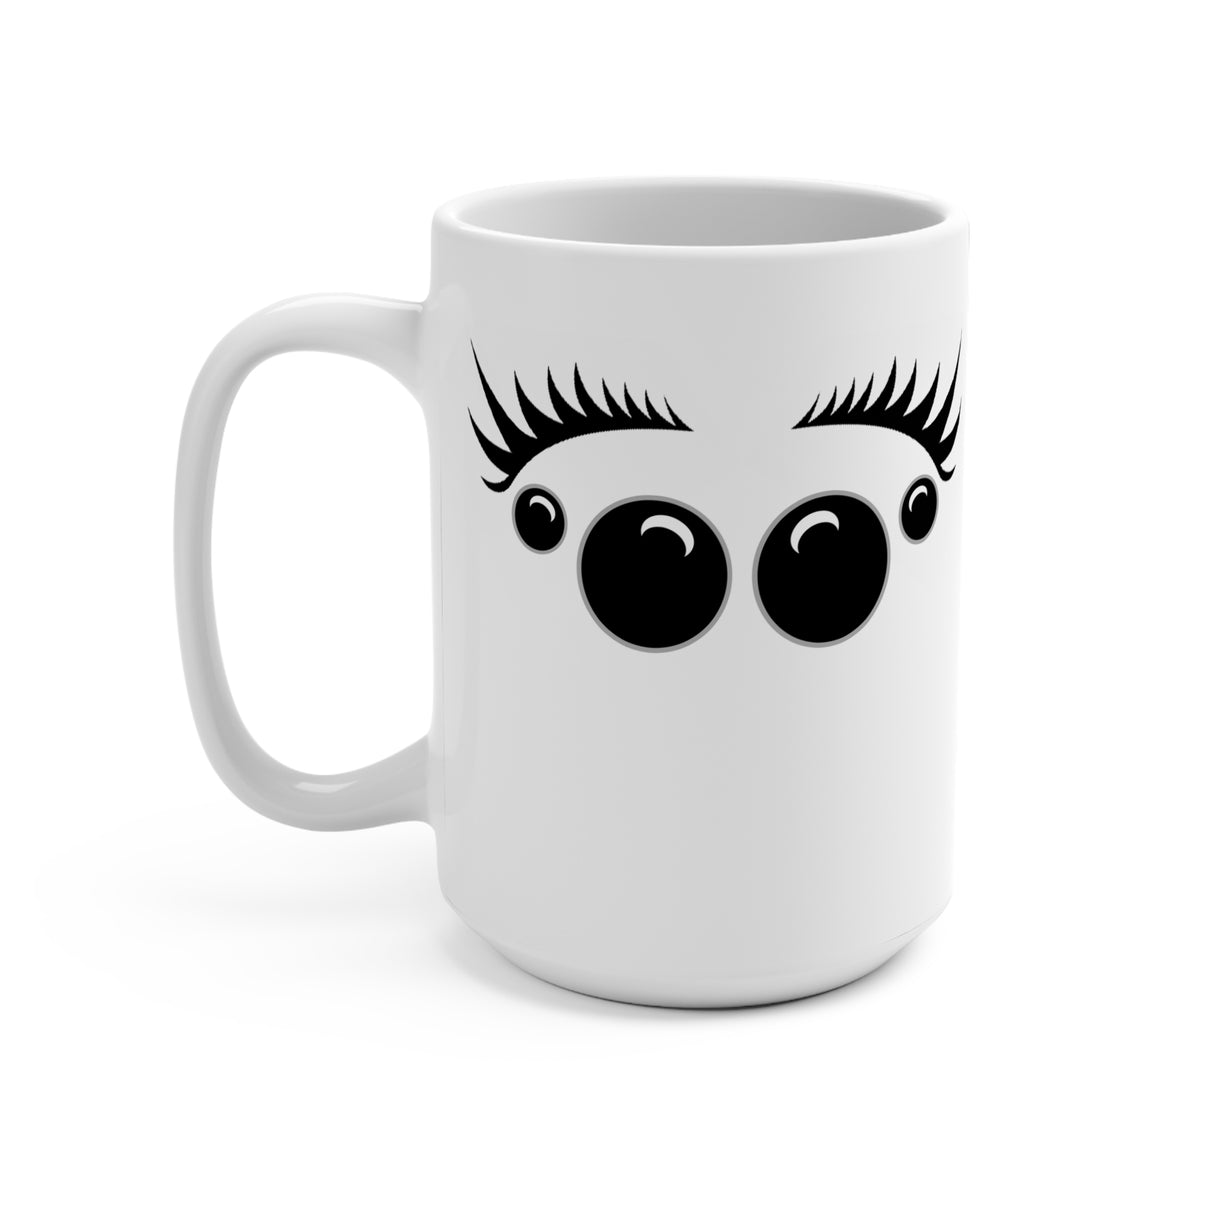 Mug 15oz Featuring "Jumping Spider" Eyes from BFP